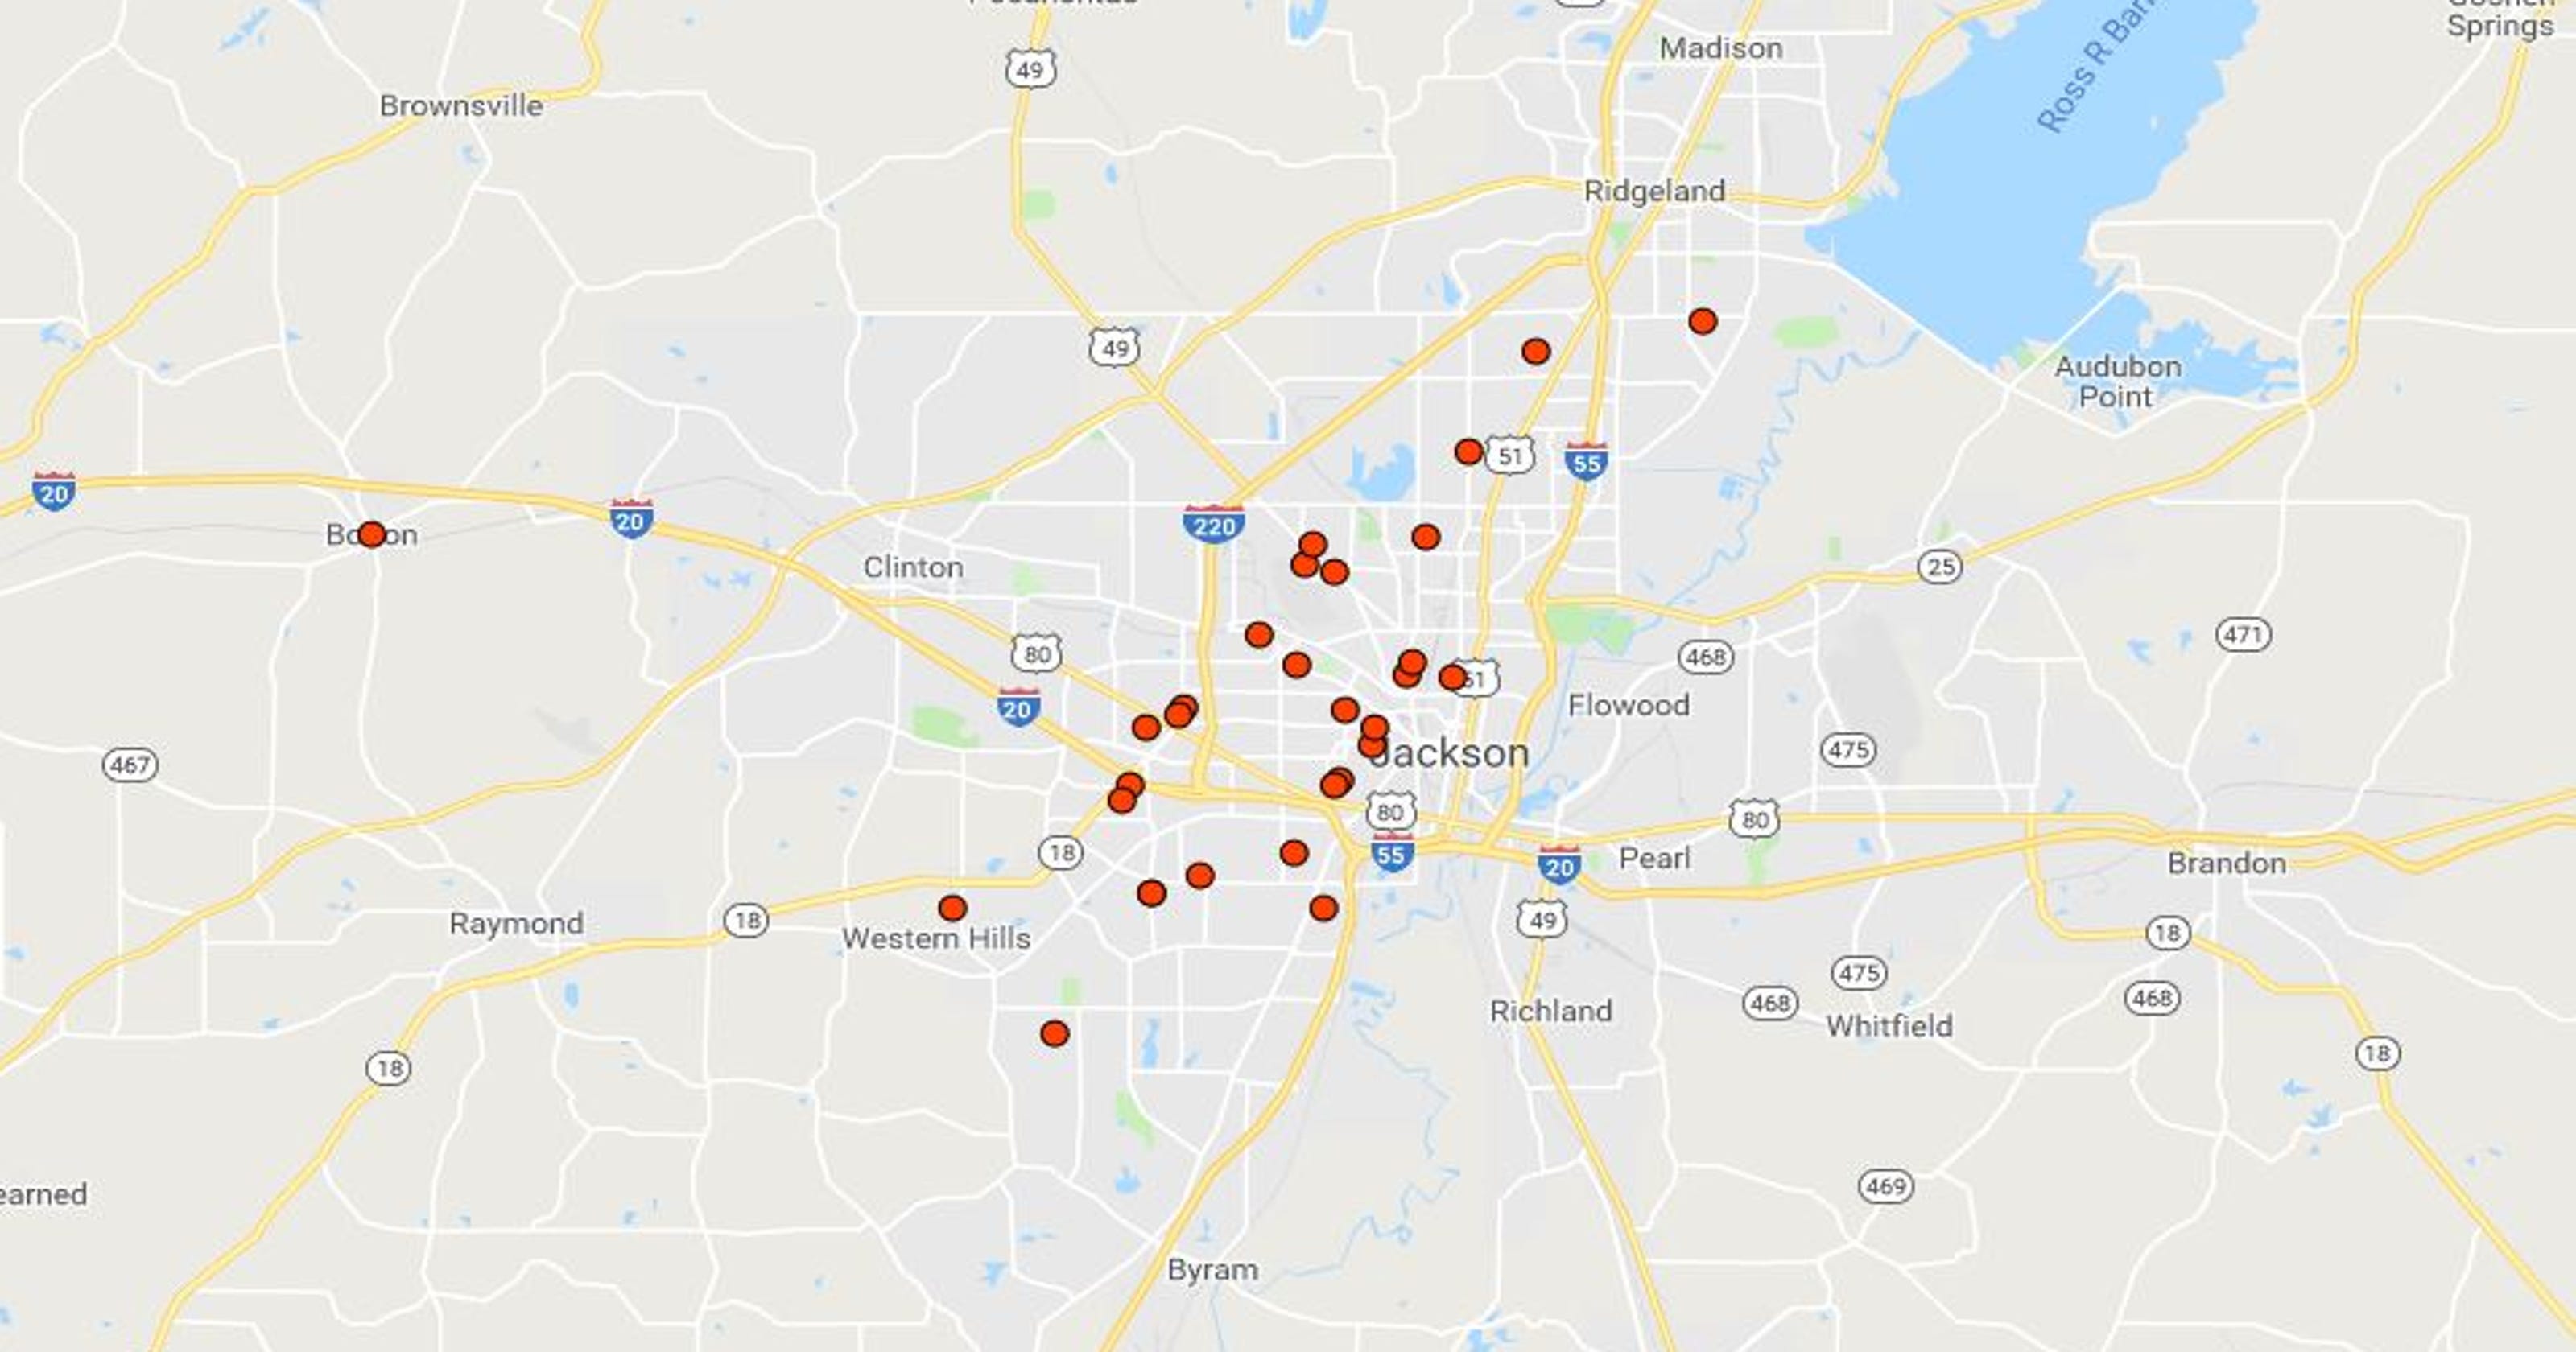 Jackson homicide map 32 killed and counting in 2019